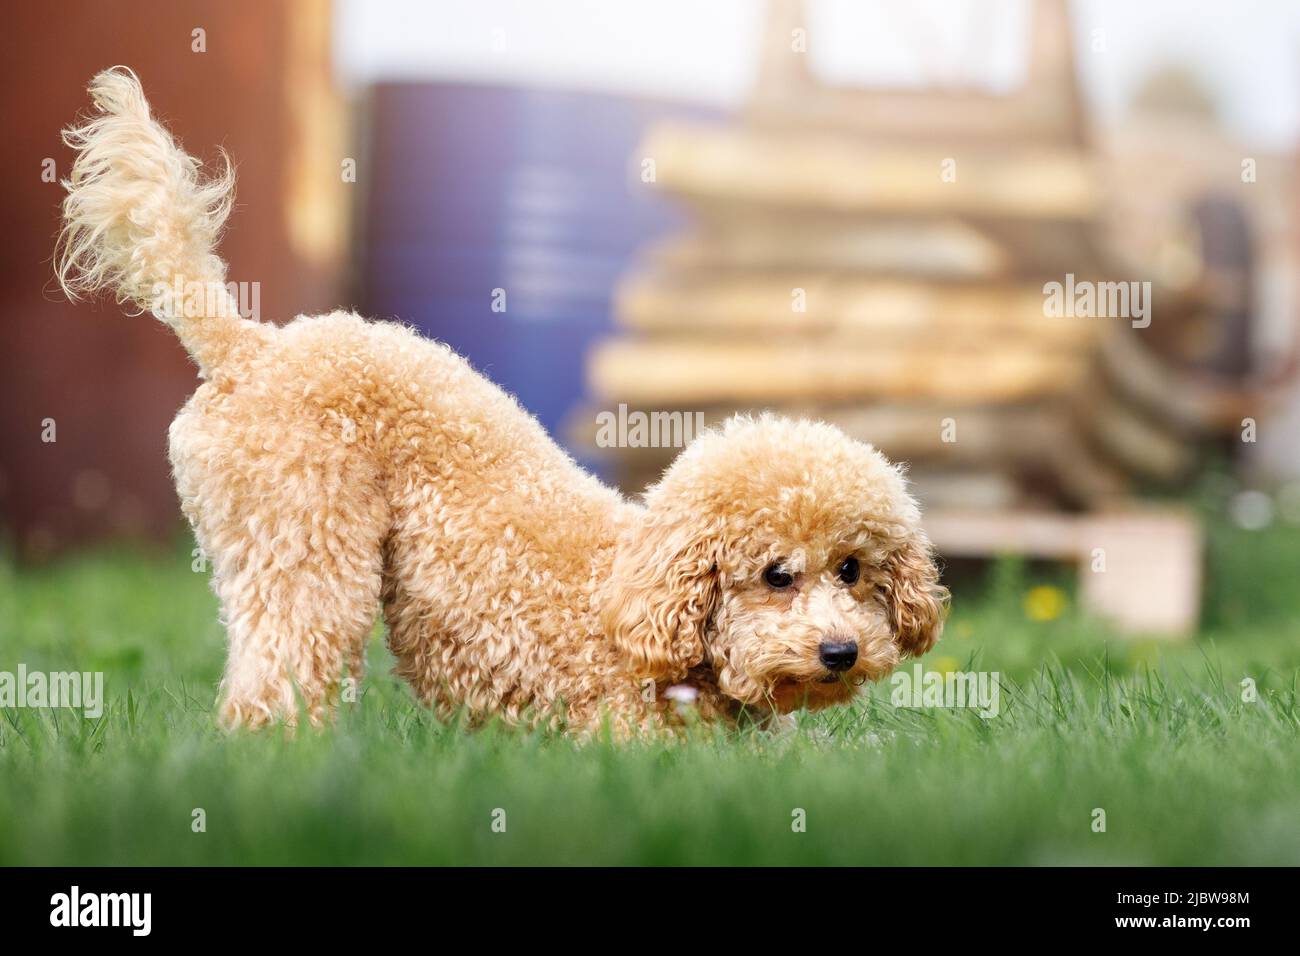 A small peach color puppy romp in the yard on the grass. Stock Photo